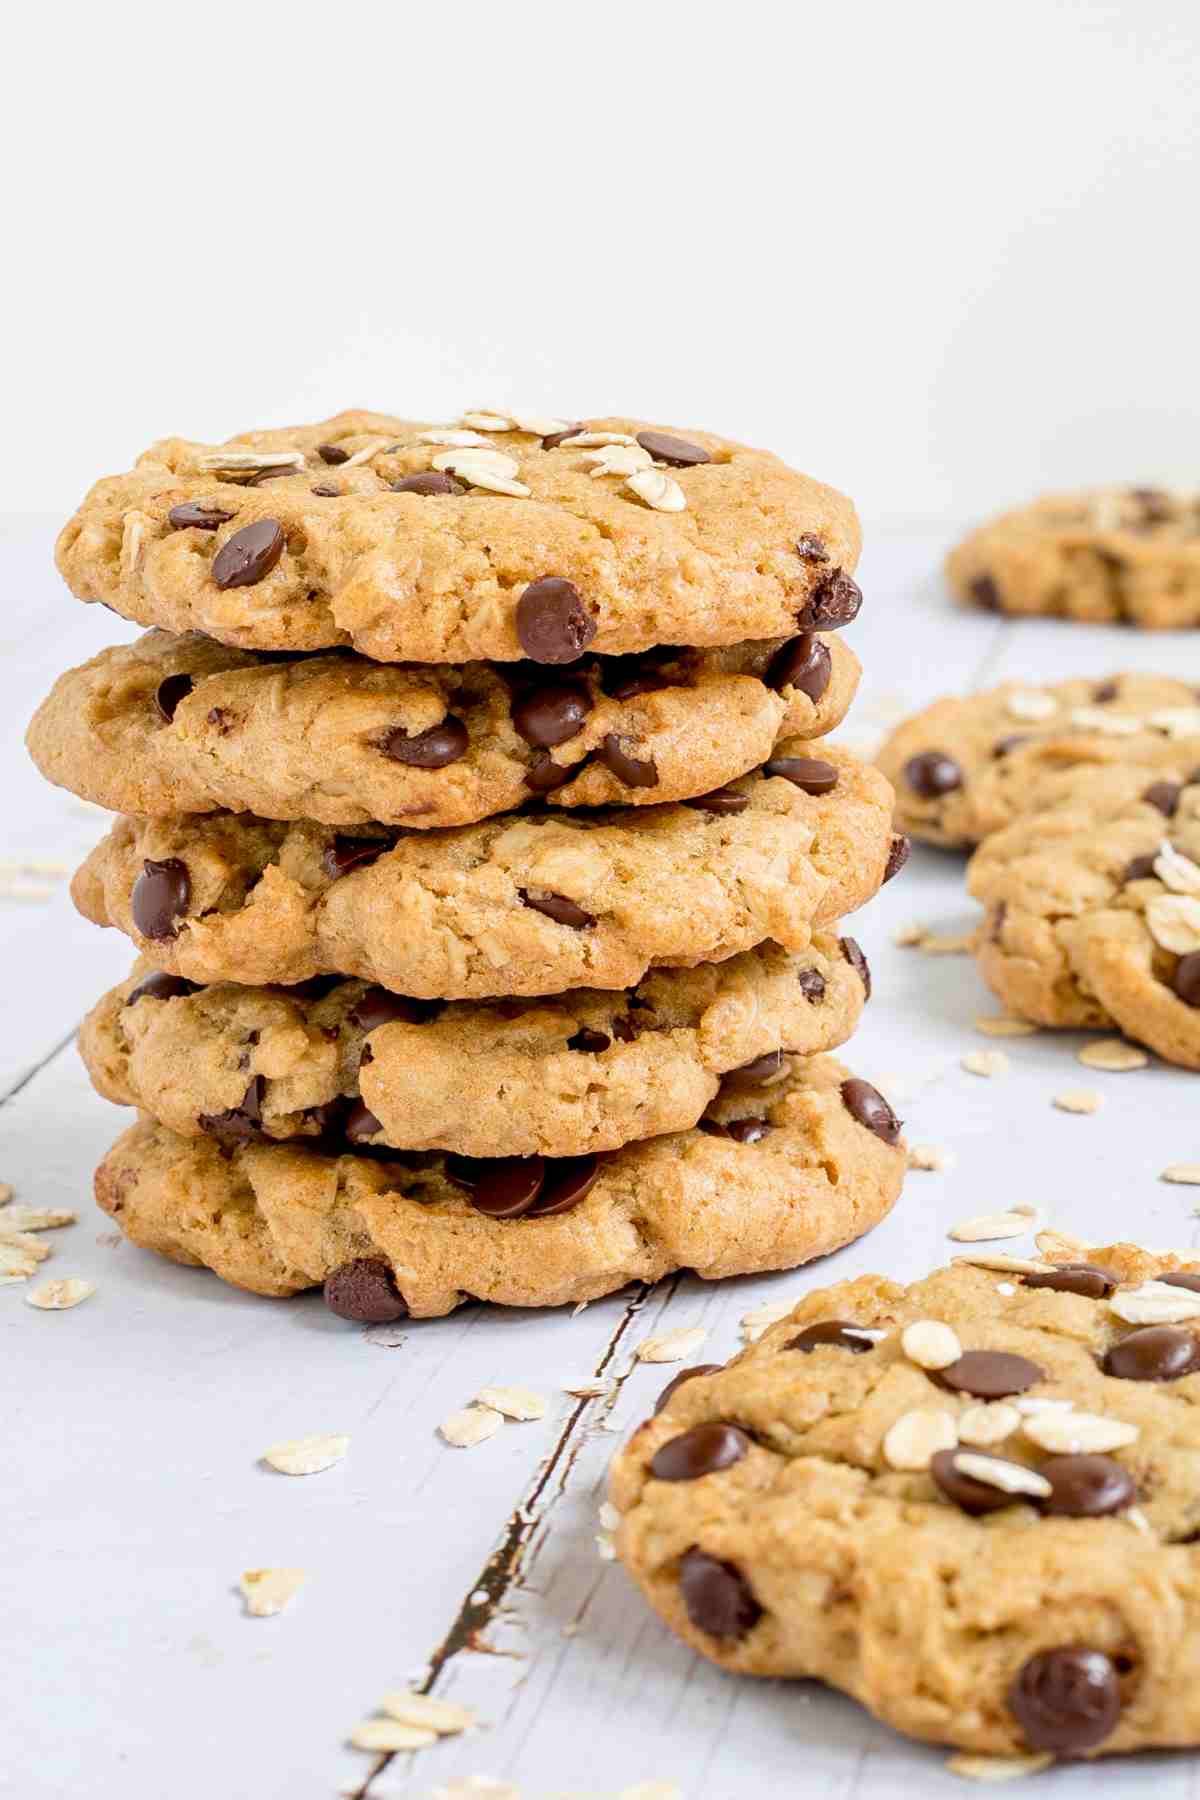 A stack of cookies with oats and chocolate chips on a wooden surface. More oats are sprinkled around them.